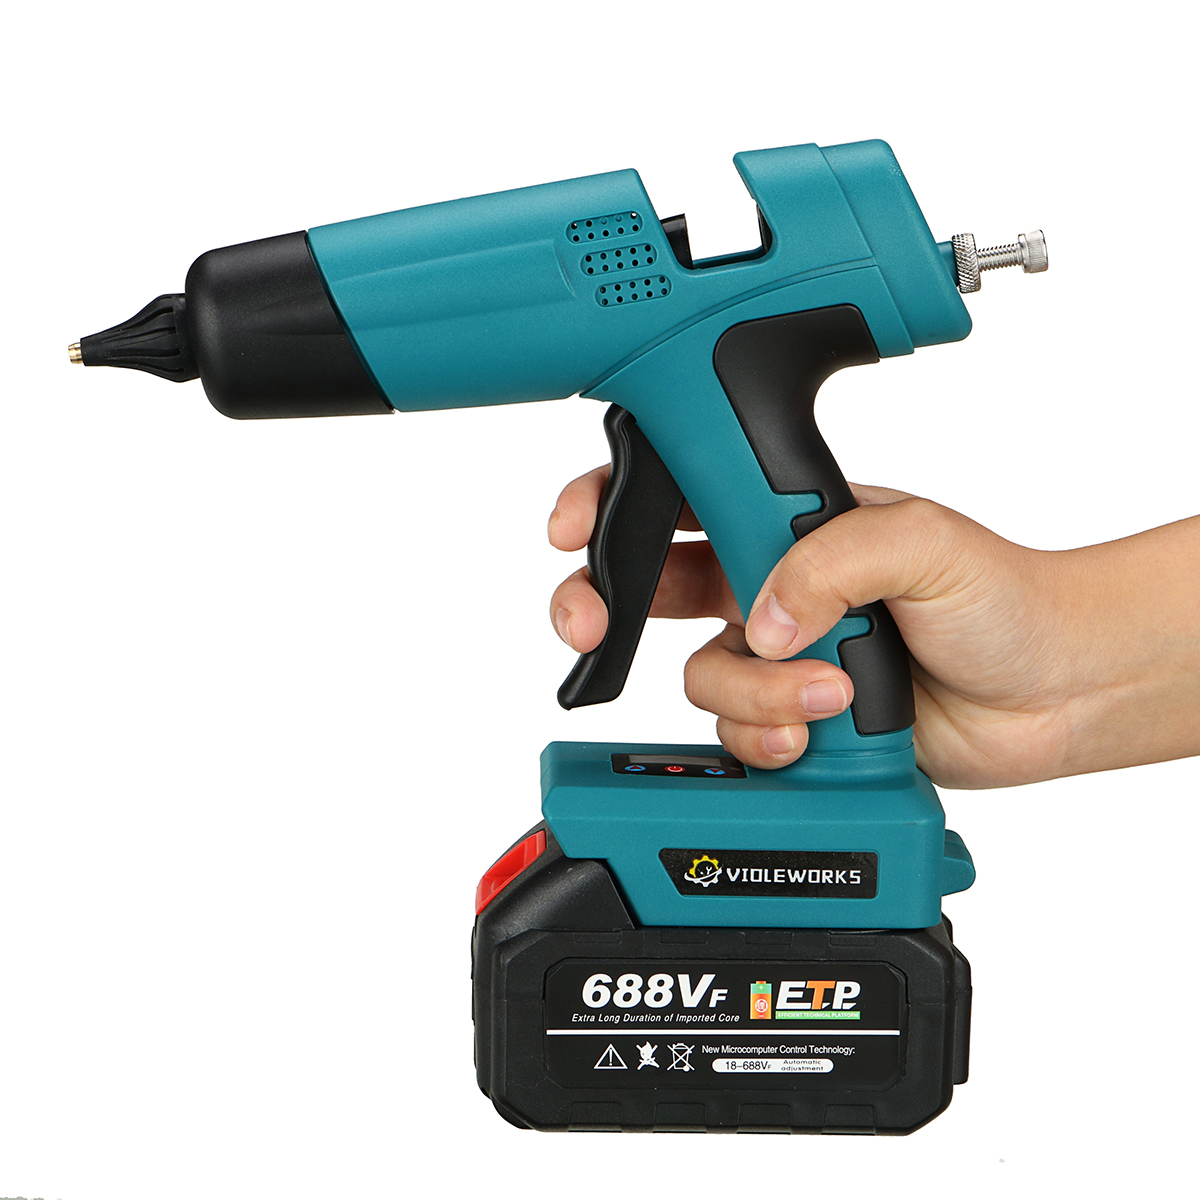 Find VIOLEWORKS 688VF 2000W Hot Melt Glue Guns Cordless Rechargeable Hot Glue Applicator Home Improvement Craft DIY For Makita Battery for Sale on Gipsybee.com with cryptocurrencies